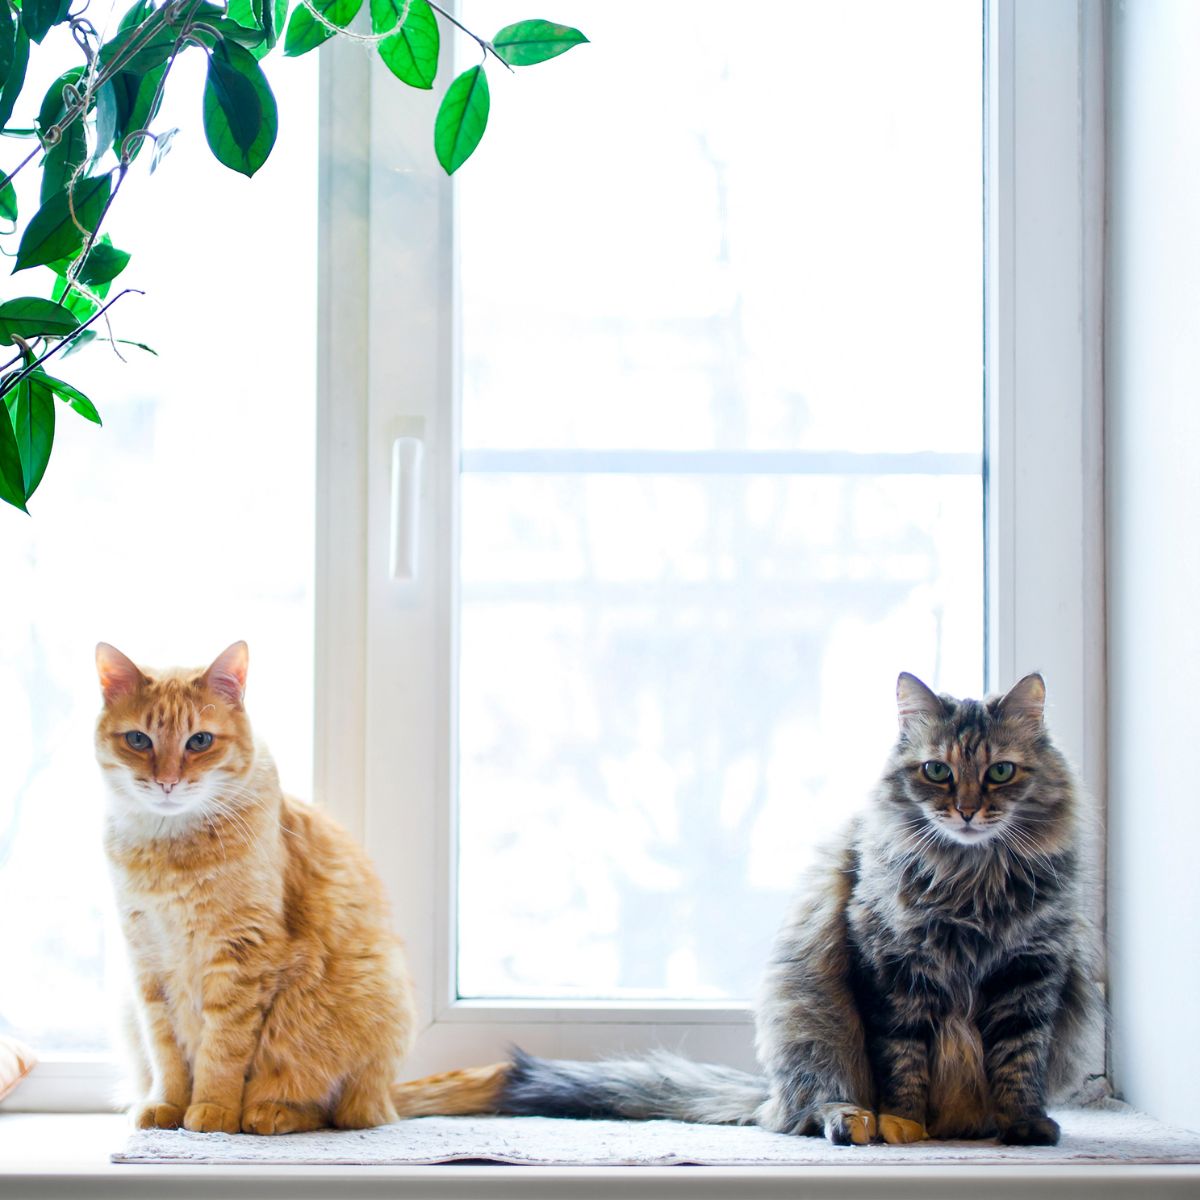 two cats sitting next to a window